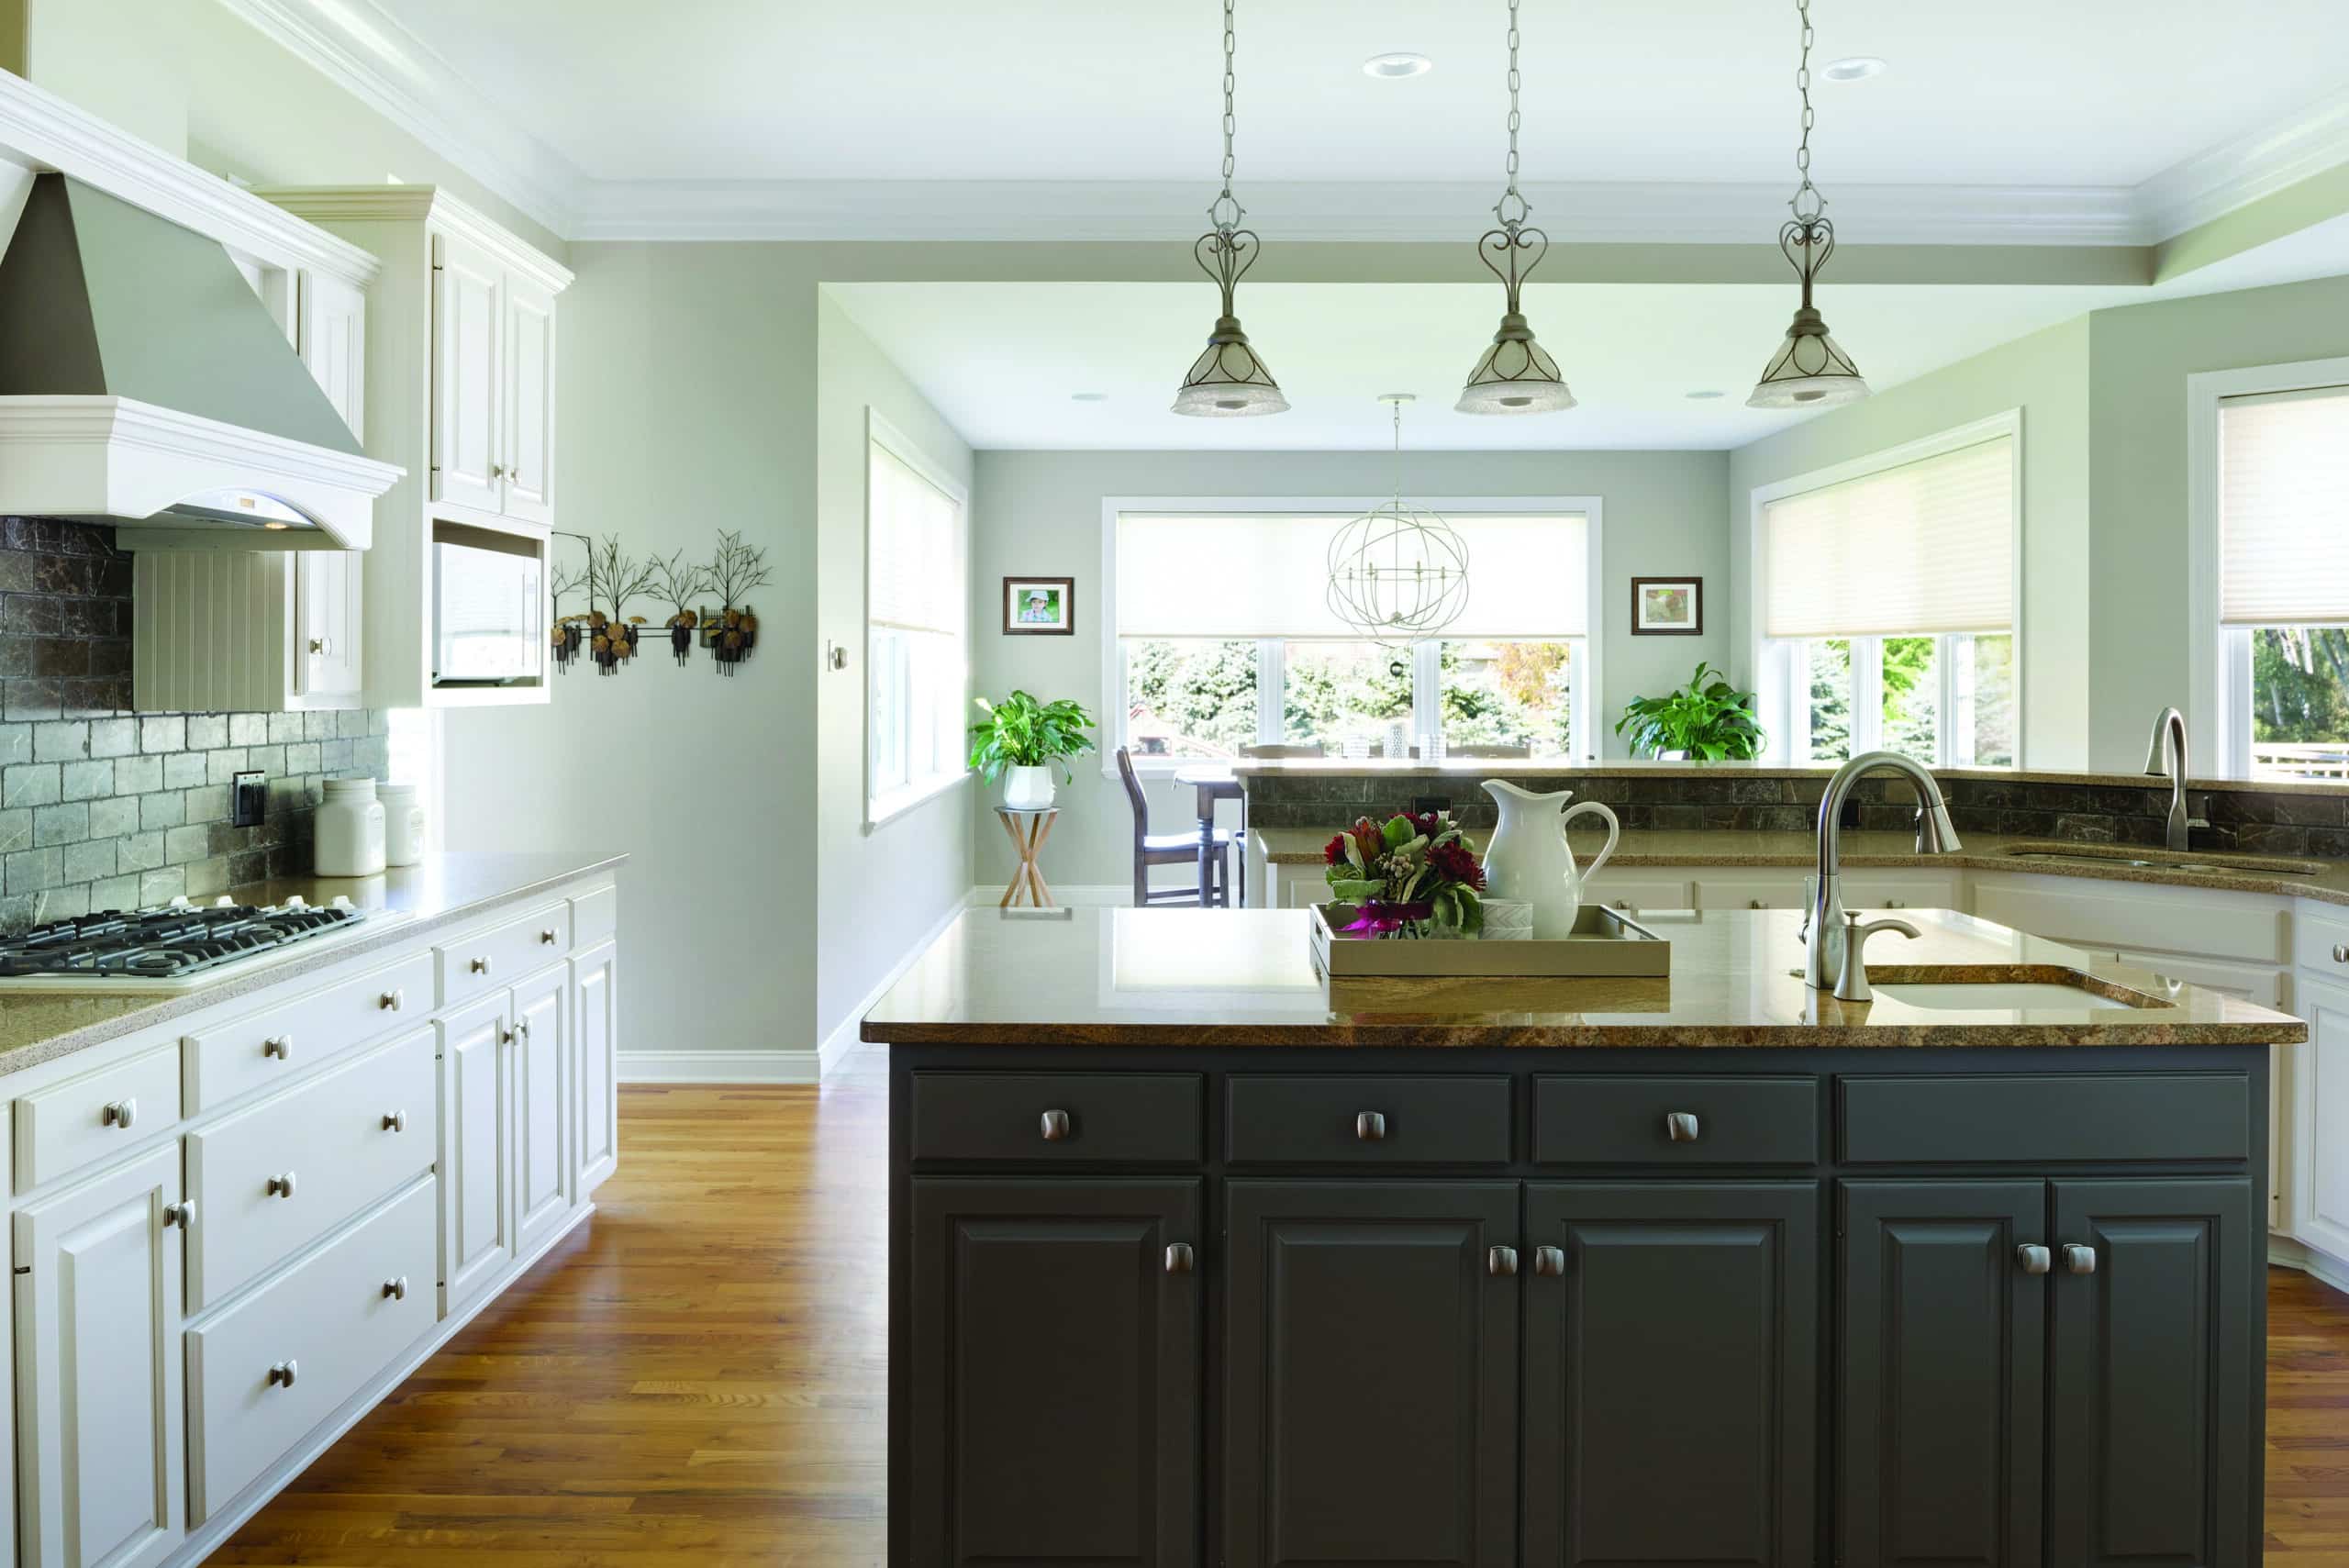 Kitchen Remodel featuring contrasting cabinet colors